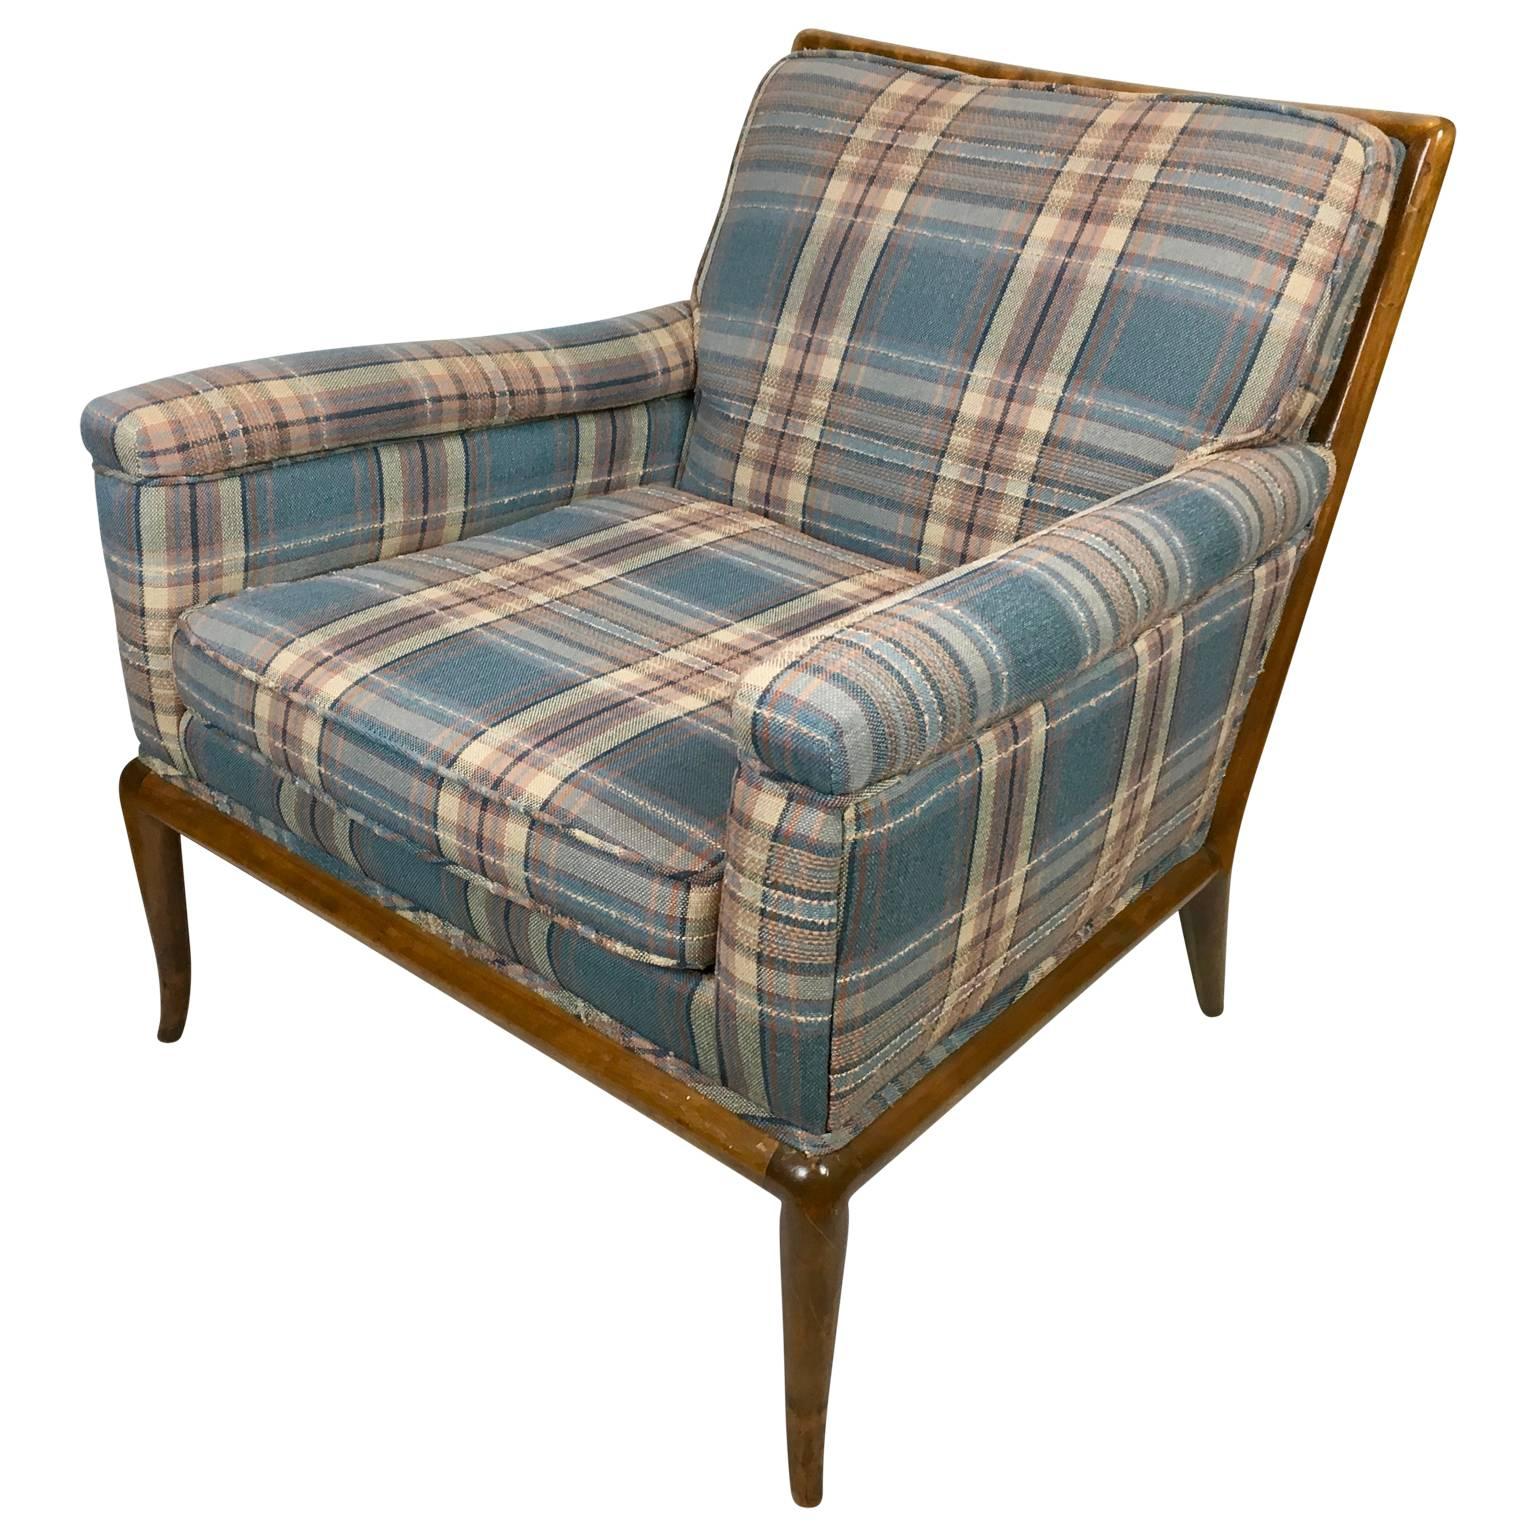 T. H. Robsjohn-Gibbings lounge chair for Widdicomb, circa 1950s. Walnut frame covered in vintage plaid. Frame is in excellent original finish. Fabric is clean, no fading, stains, or wear. Frame has no cracks, gouges or wear.